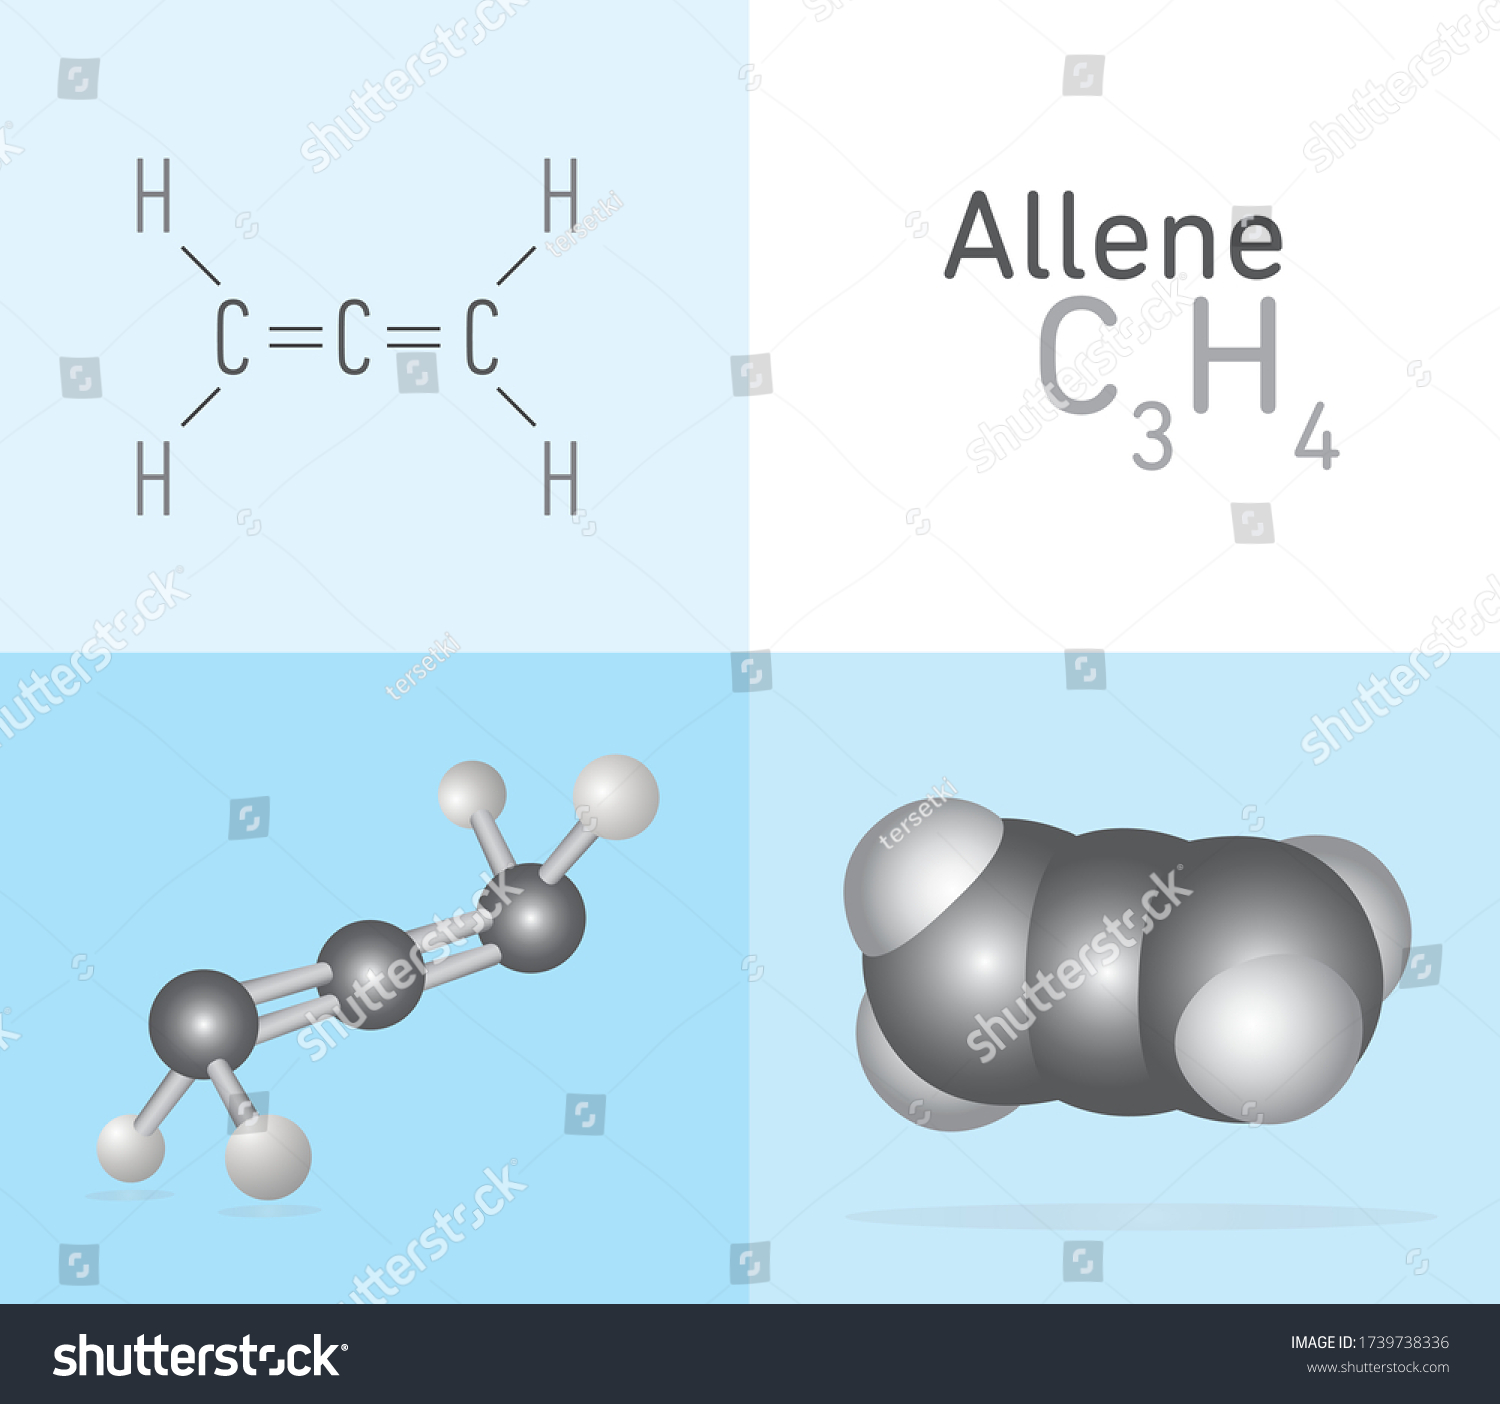 7 Isomerism ball and stick Images, Stock Photos & Vectors | Shutterstock